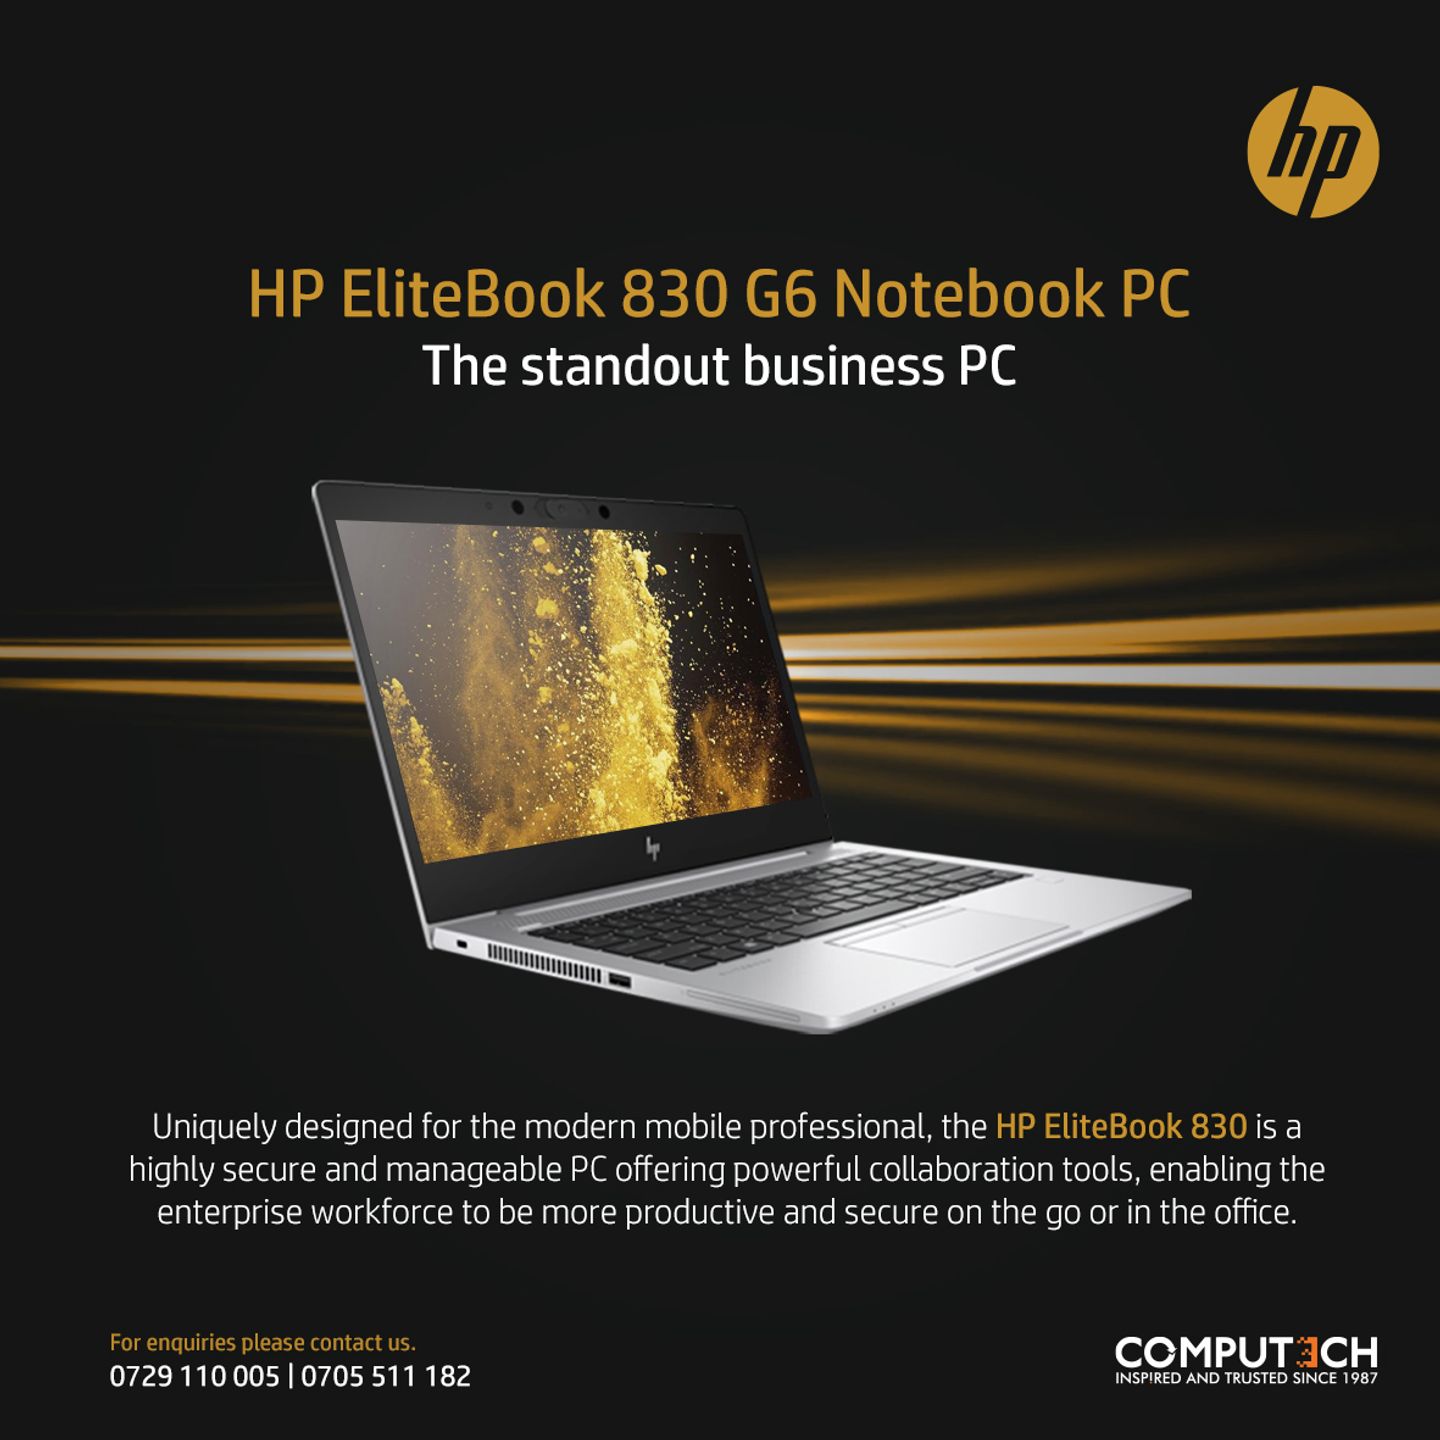 Hp Elitebook 830 G6 Notebook Pc, the Standout Business Pc